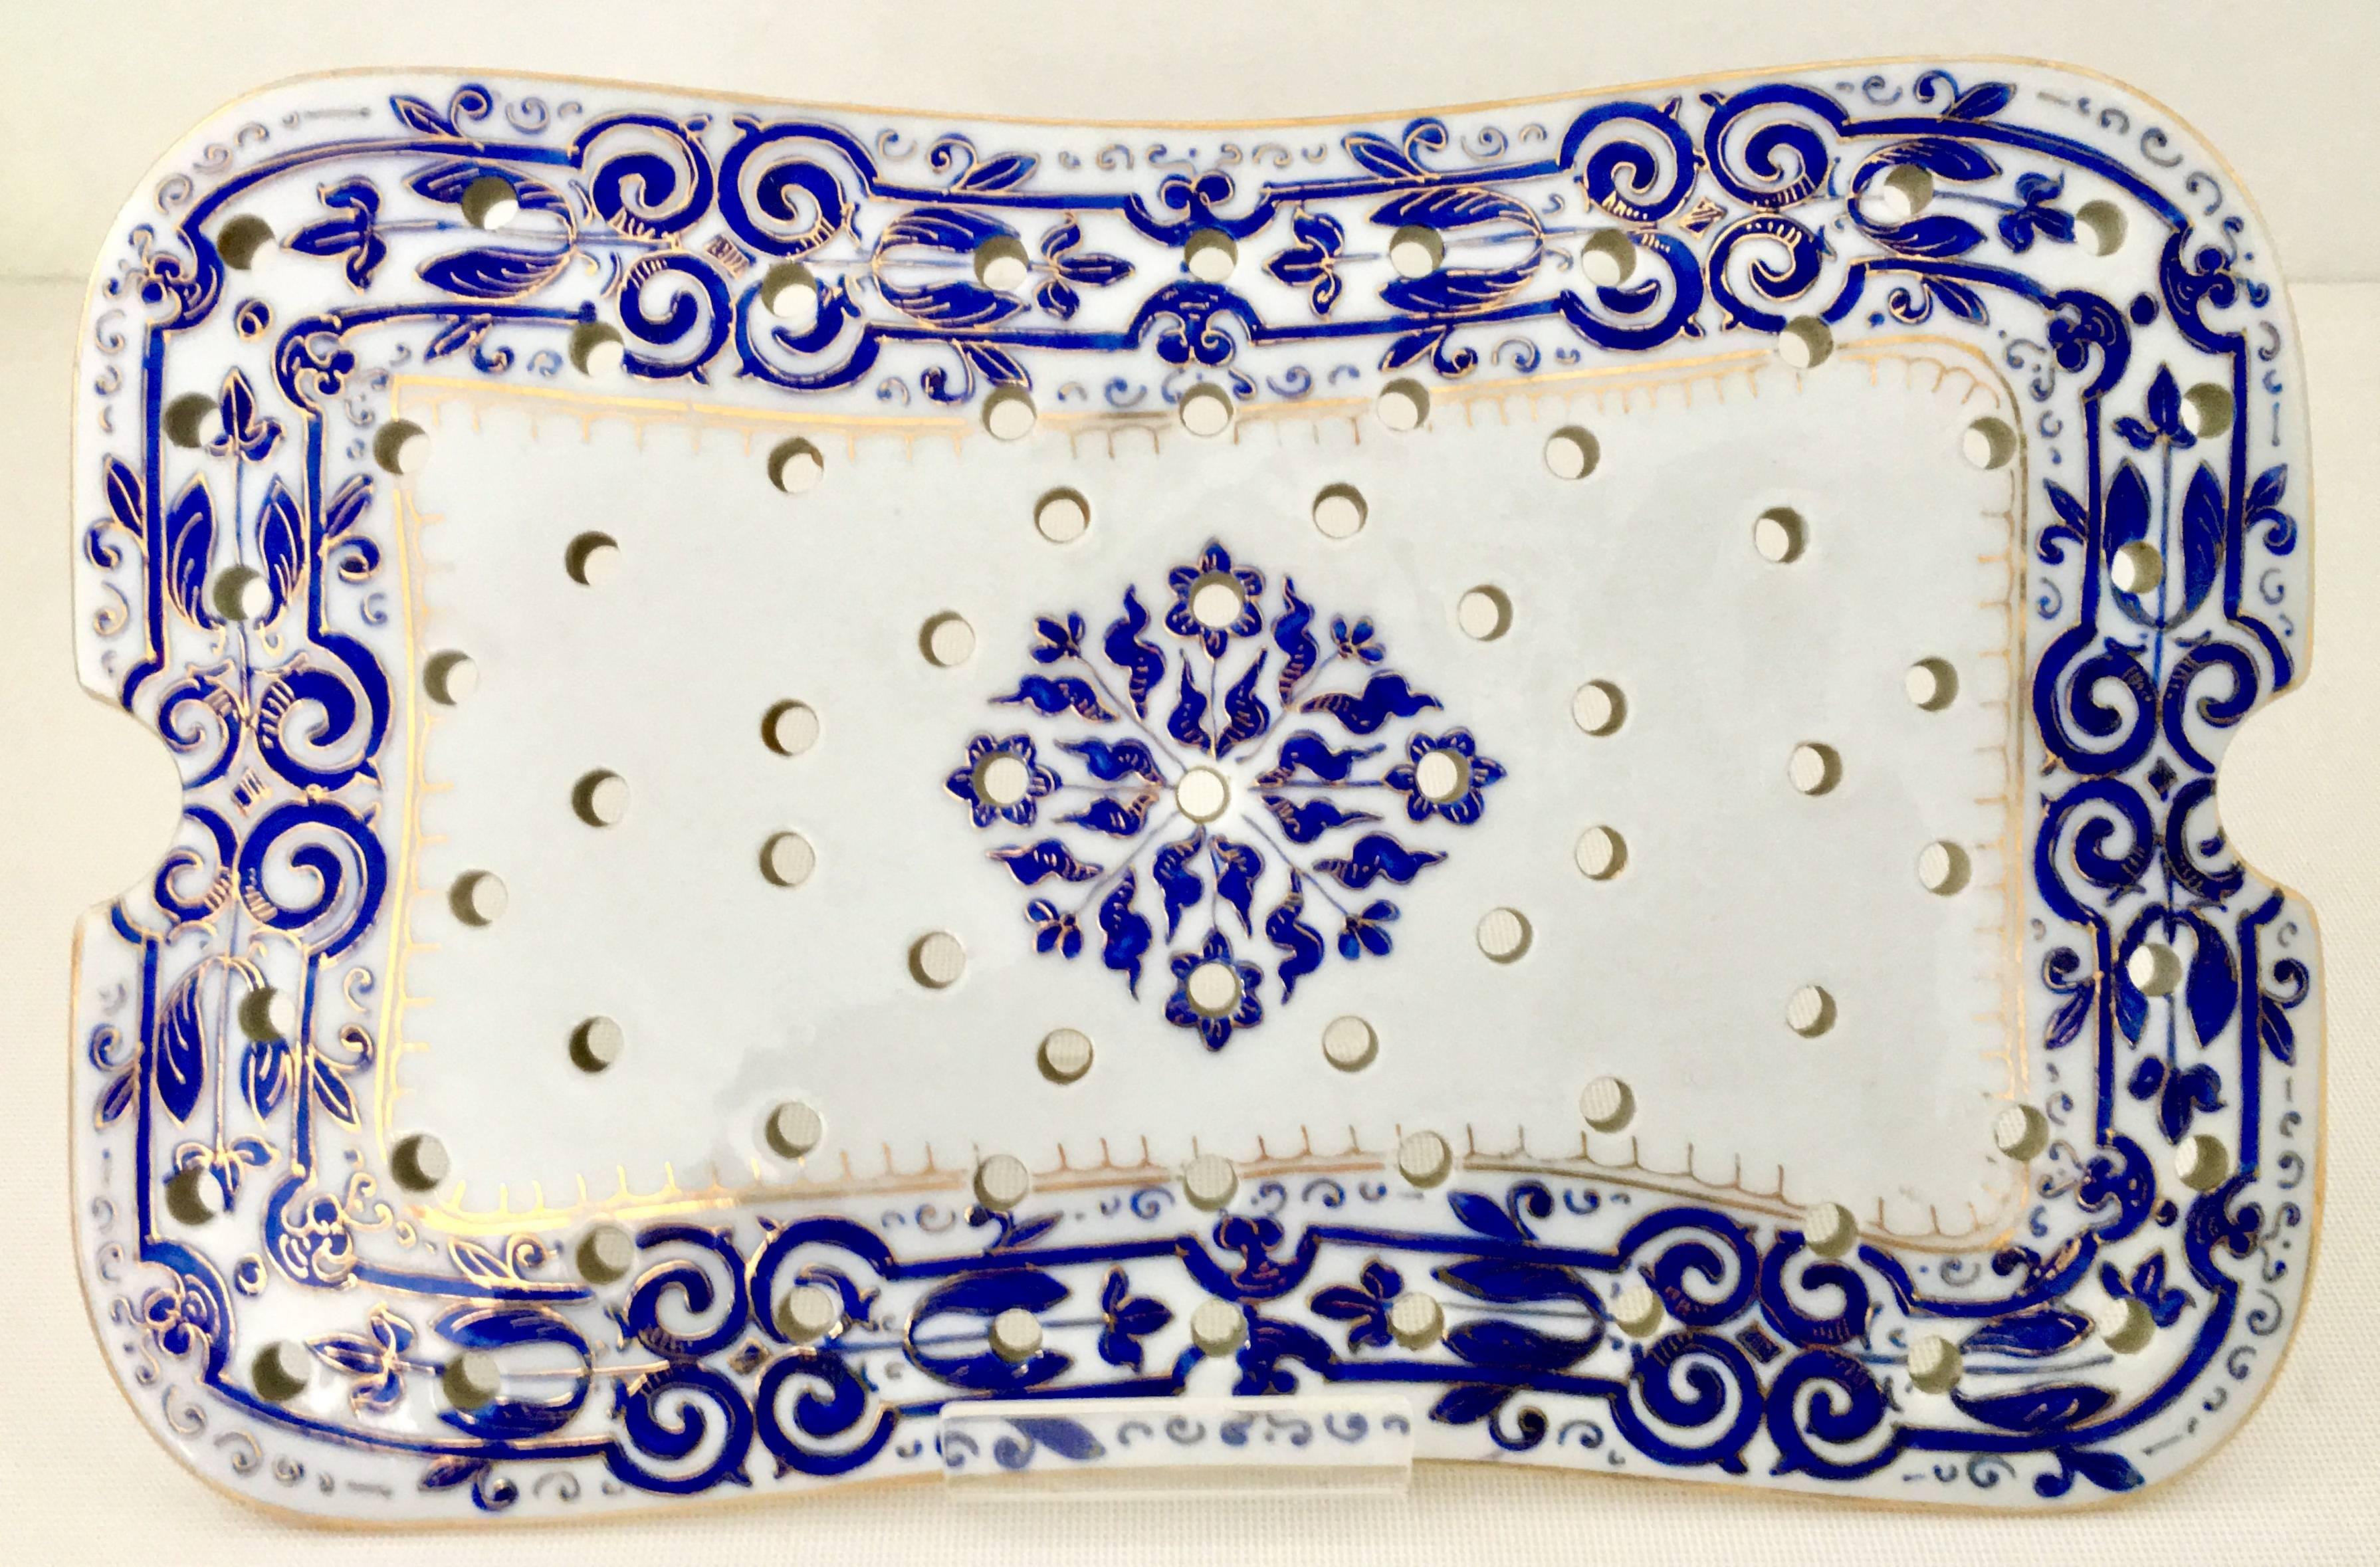 Antique Dresden style hand-painted Porcelain serving tray and trivet by Fischer & Mieg. This extremely rare pattern features a white ground with a vibrant cobalt blue "Persian" medallion floral scroll motif and has raised 22-karat gold